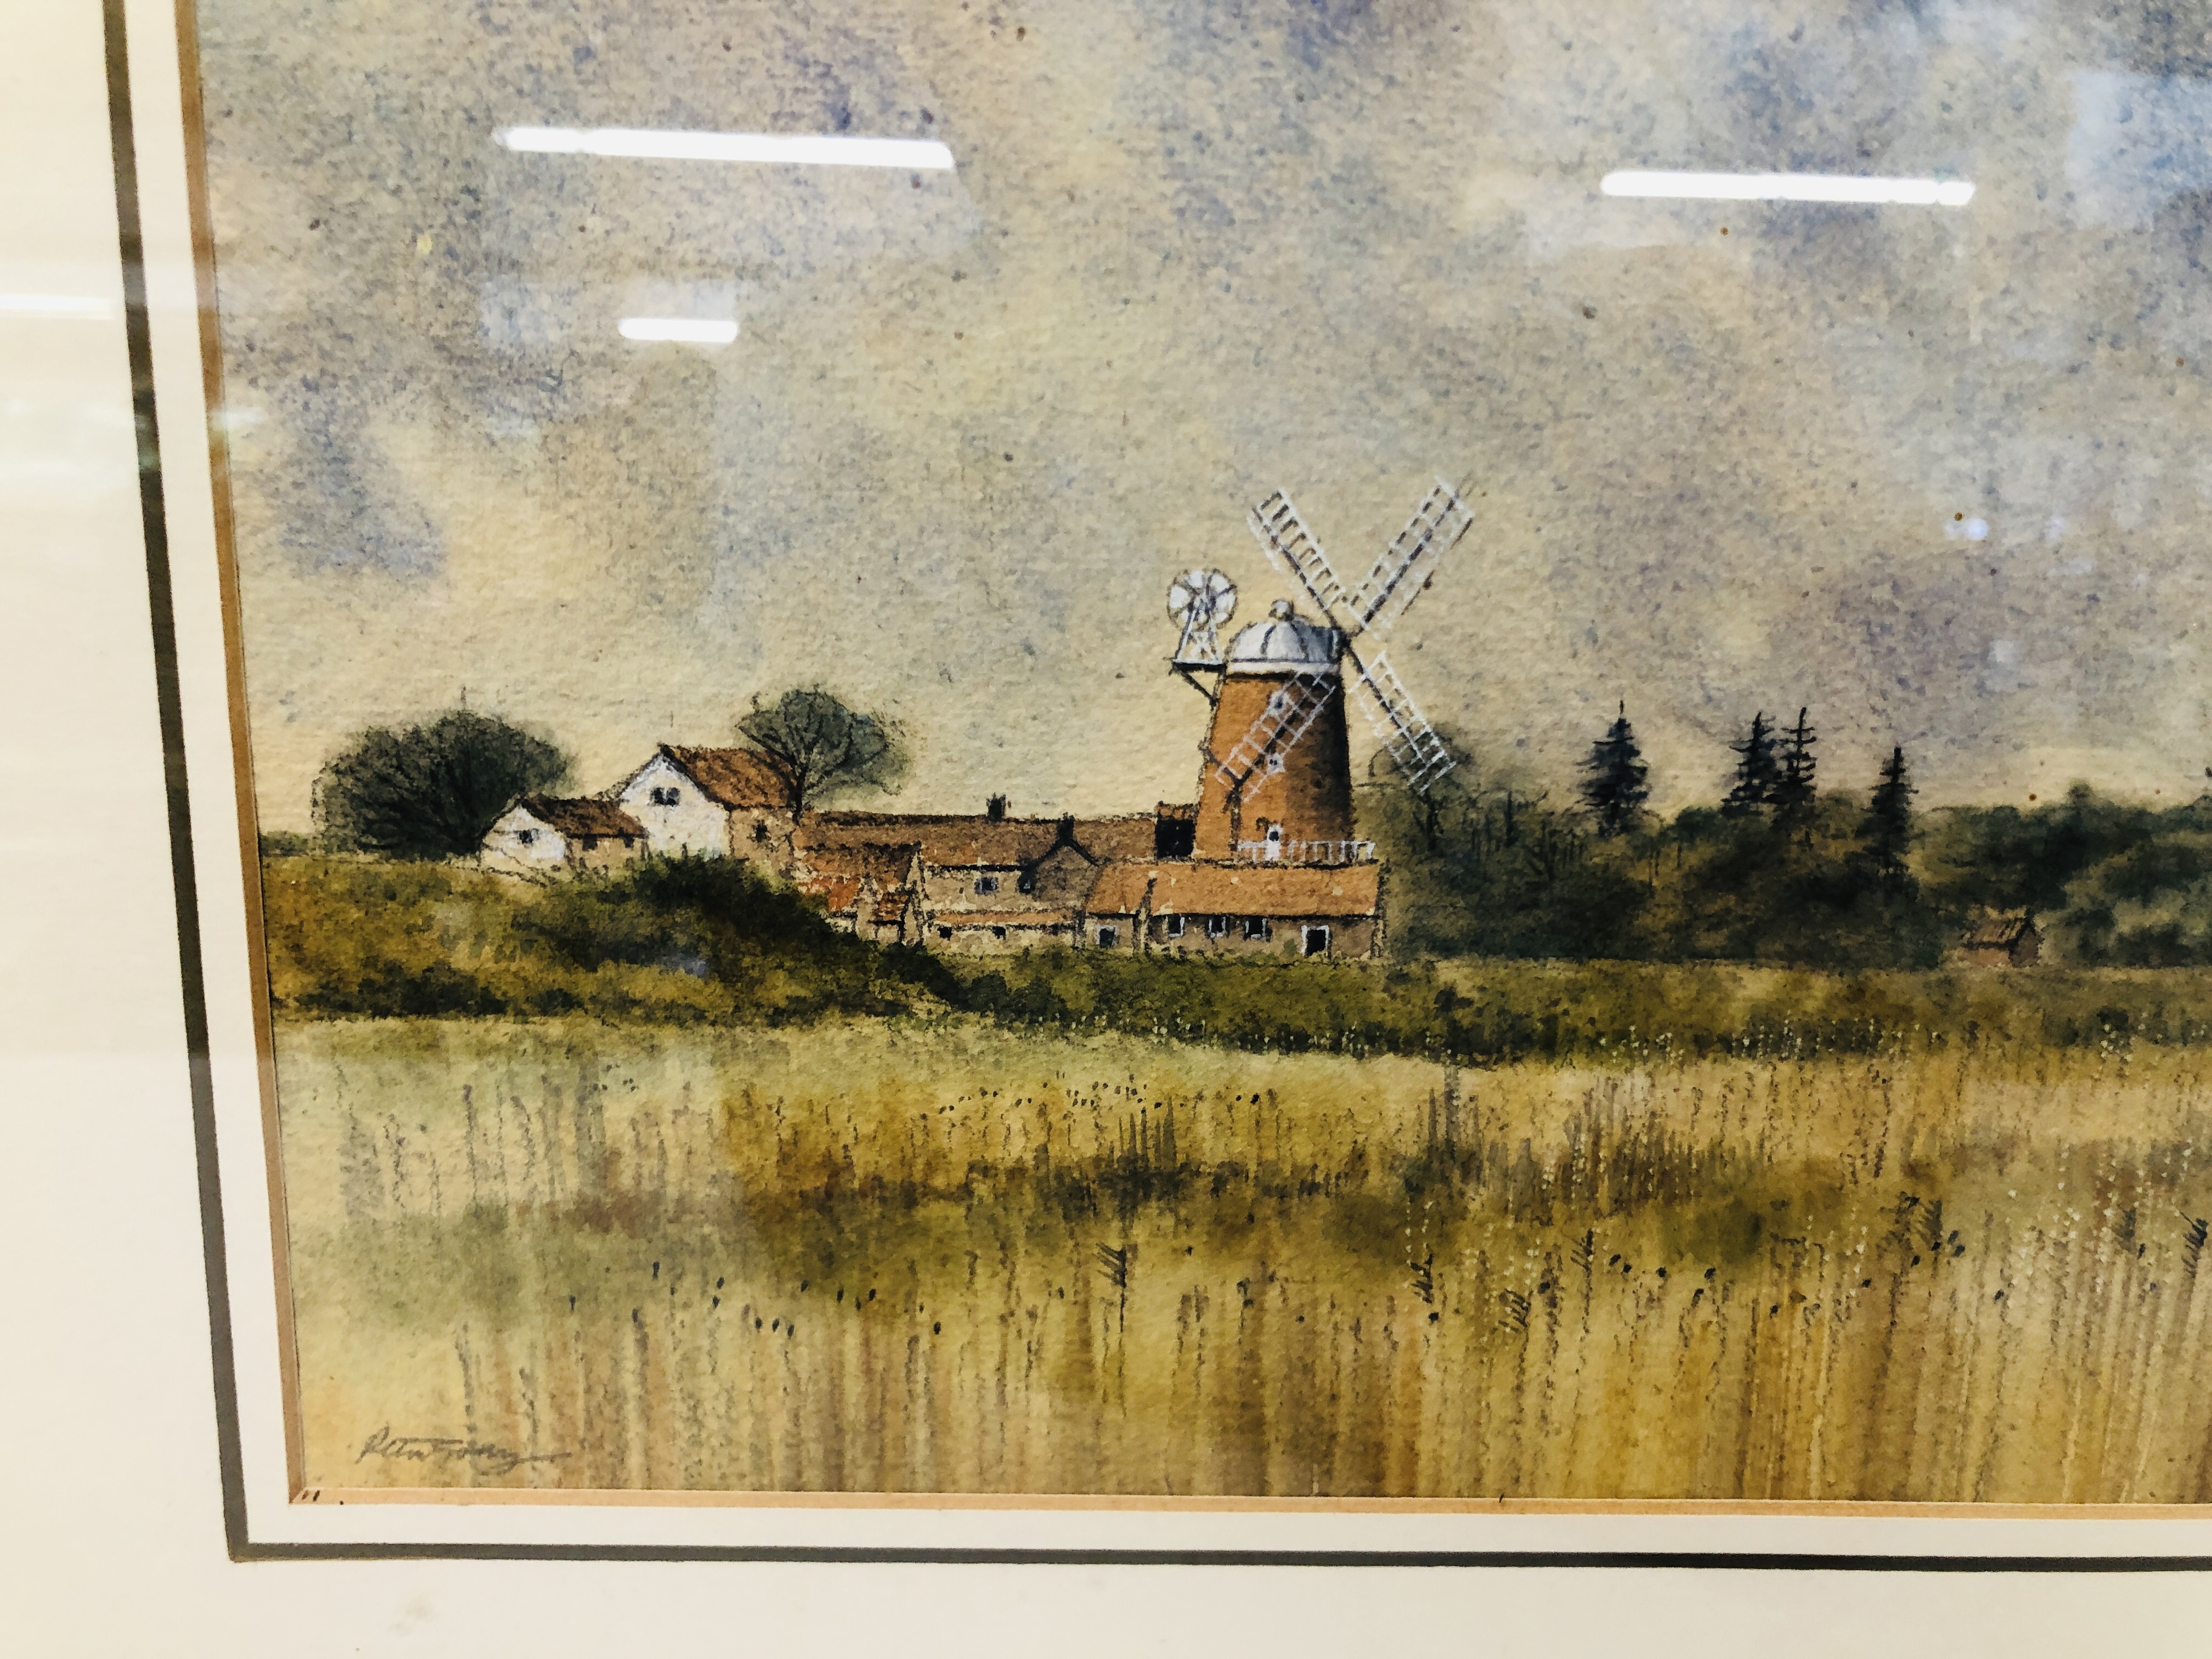 FRAMED WATERCOLOUR "CLEY MILL, JUNE" BEARING SIGNATURE PETER SOLLY WIDTH 35CM. HEIGHT 23.5CM. - Image 6 of 9